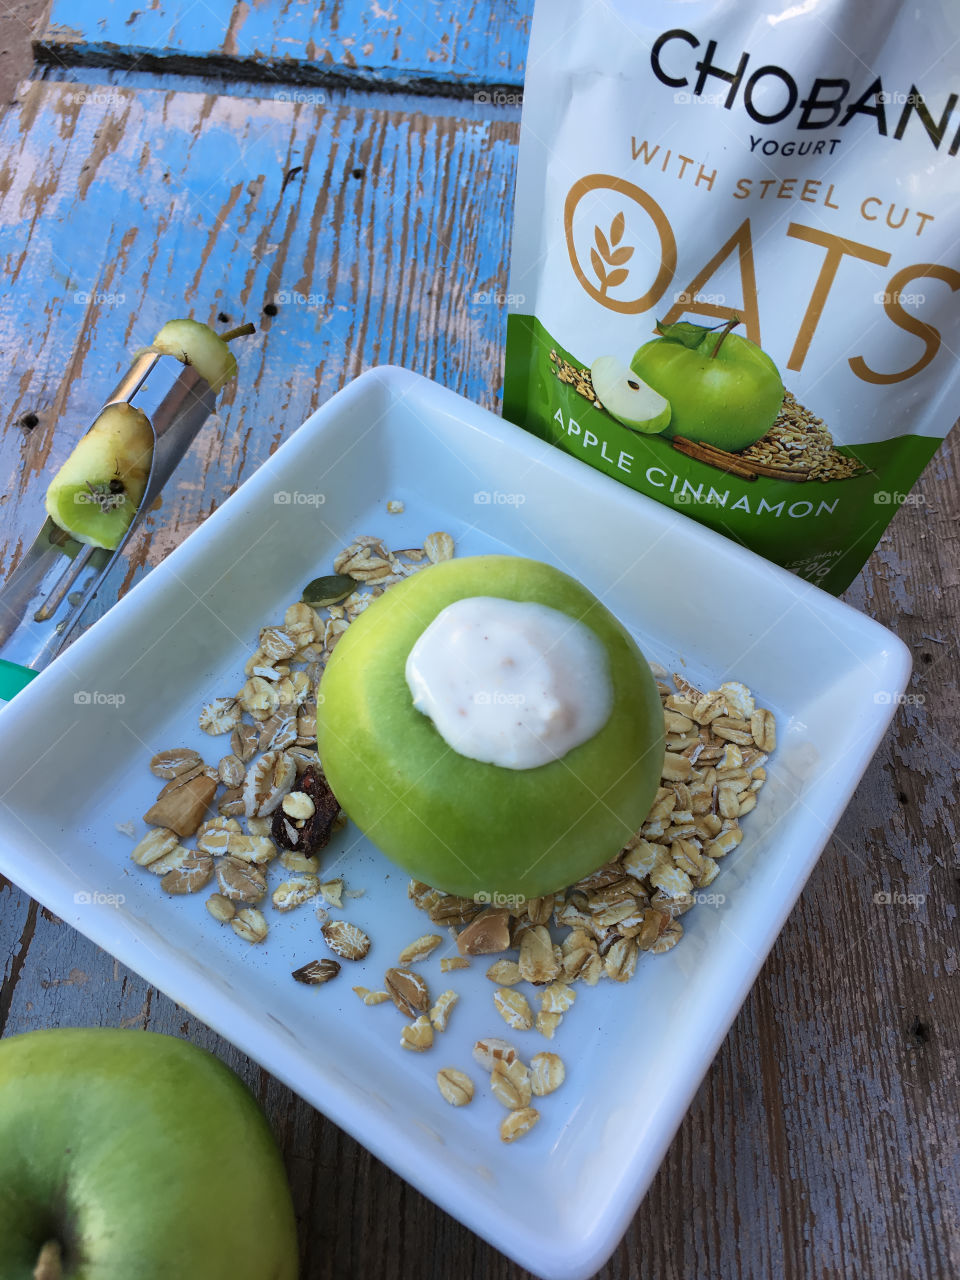 Granny Smith green apple, cored and filled with Chobani Apple Cinnamon with Steel Cut Oats Yogurt ... Yummy to the core!